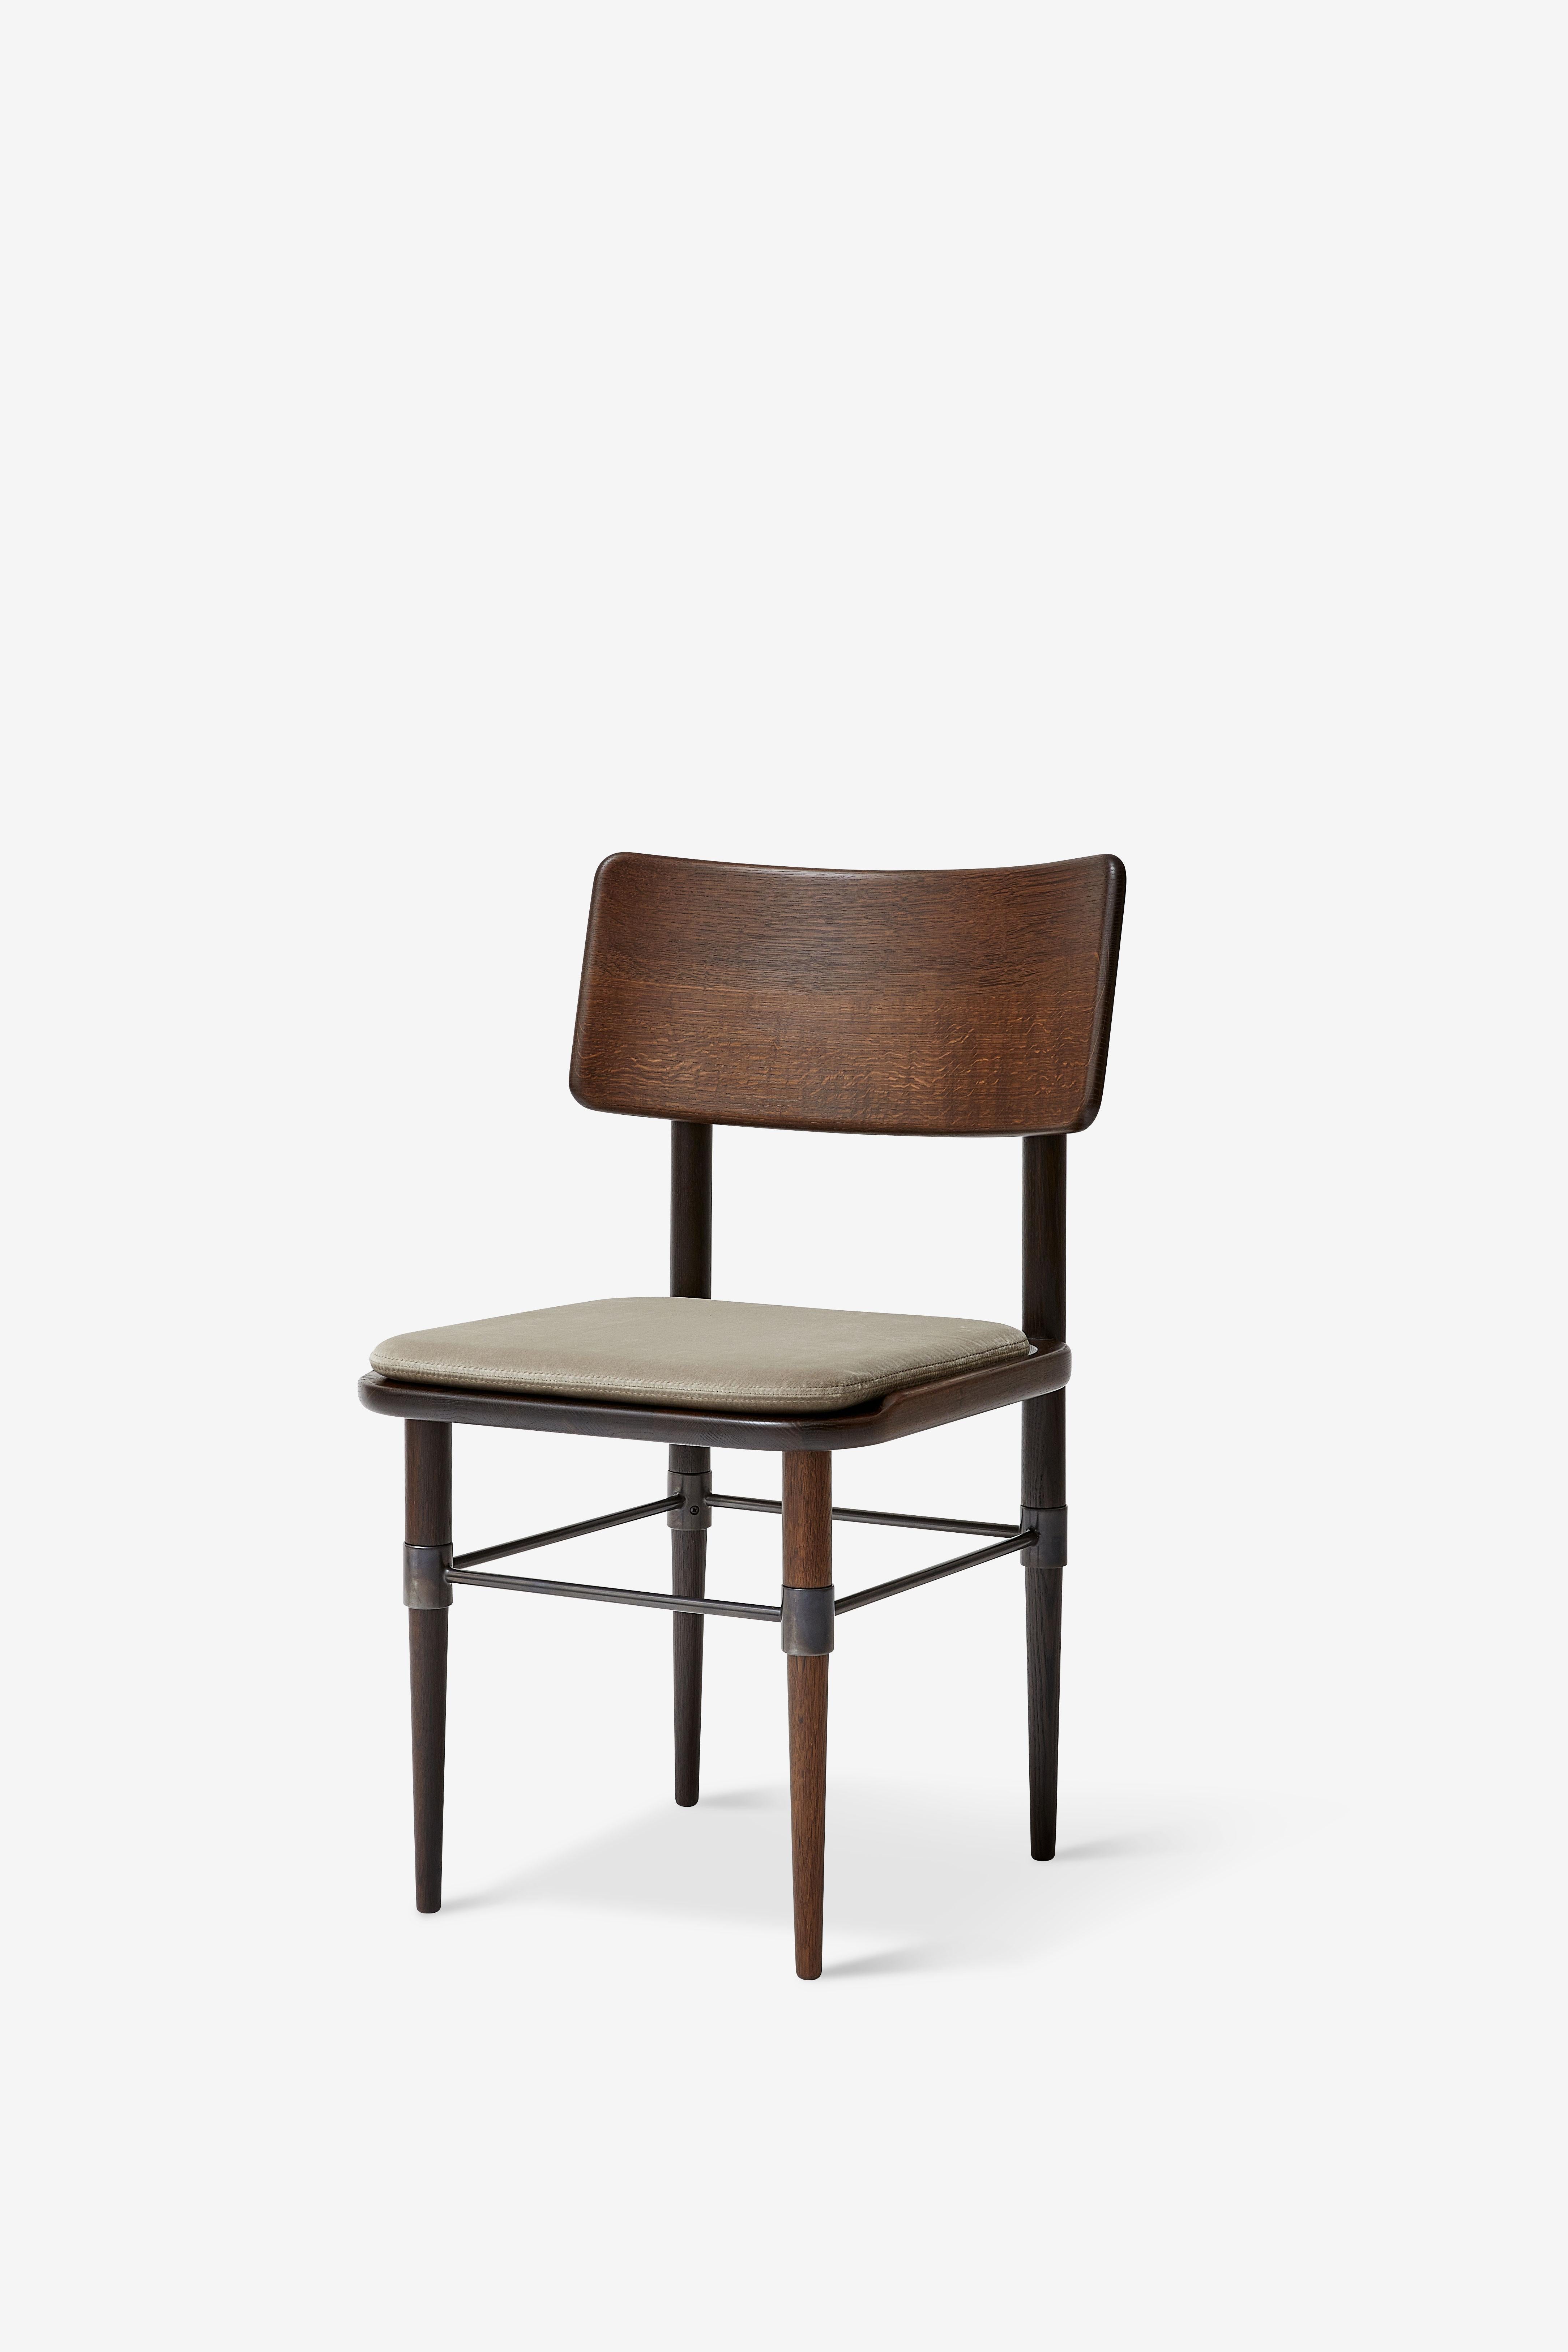 Contemporary MG101 Dining chair in smoked oak by Malte Gormsen Design by Space Copenhagen For Sale